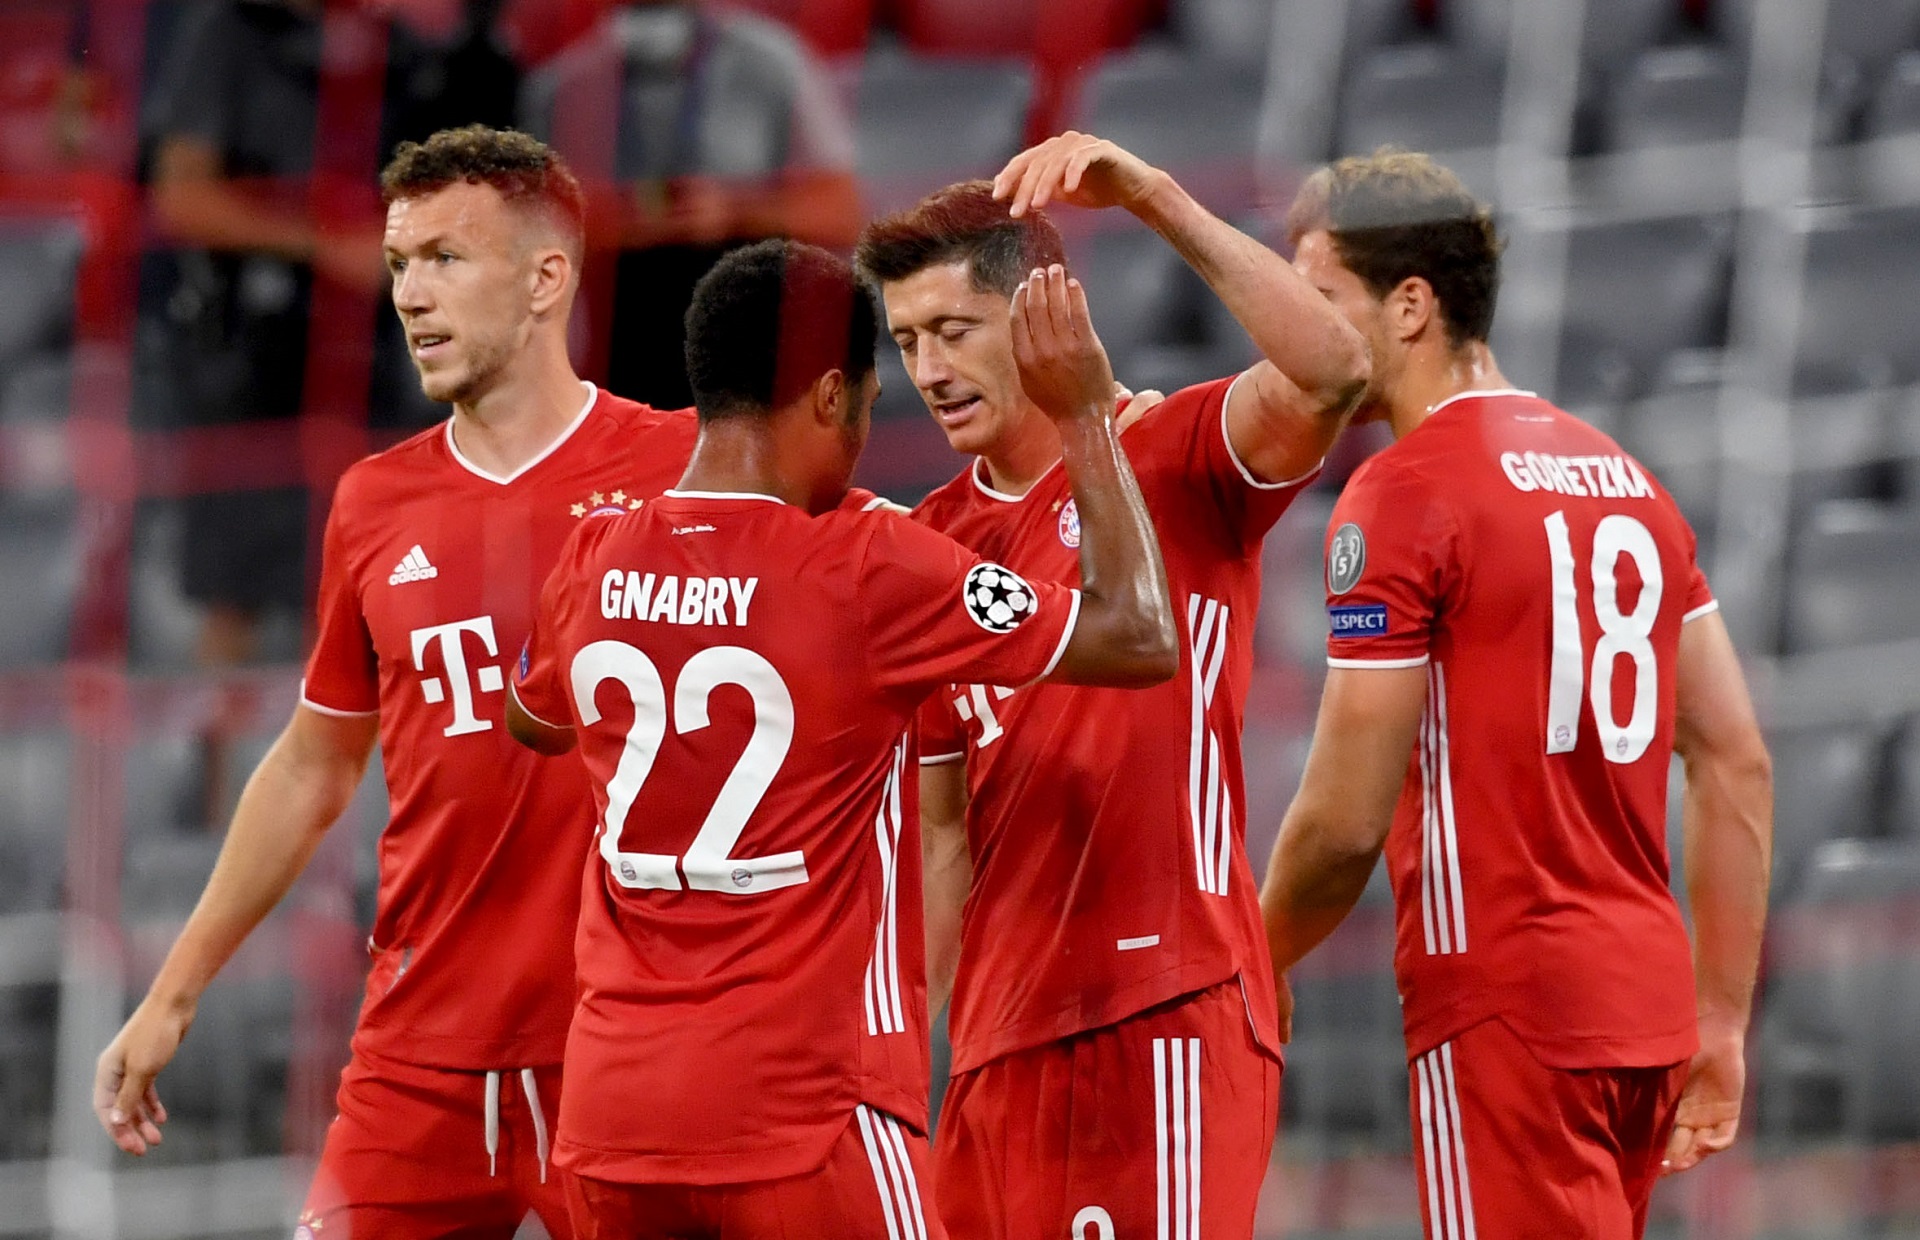 08 August 2020, Bavaria, Munich: Munich's Robert Lewandowski celebrates scoring his side's first goal with teammets during the UEFA Champions League round of 16 second leg soccer match between FC Bayern Munich and FC Chelsea at the Allianz Arena. Photo: Sven Hoppe/dpa